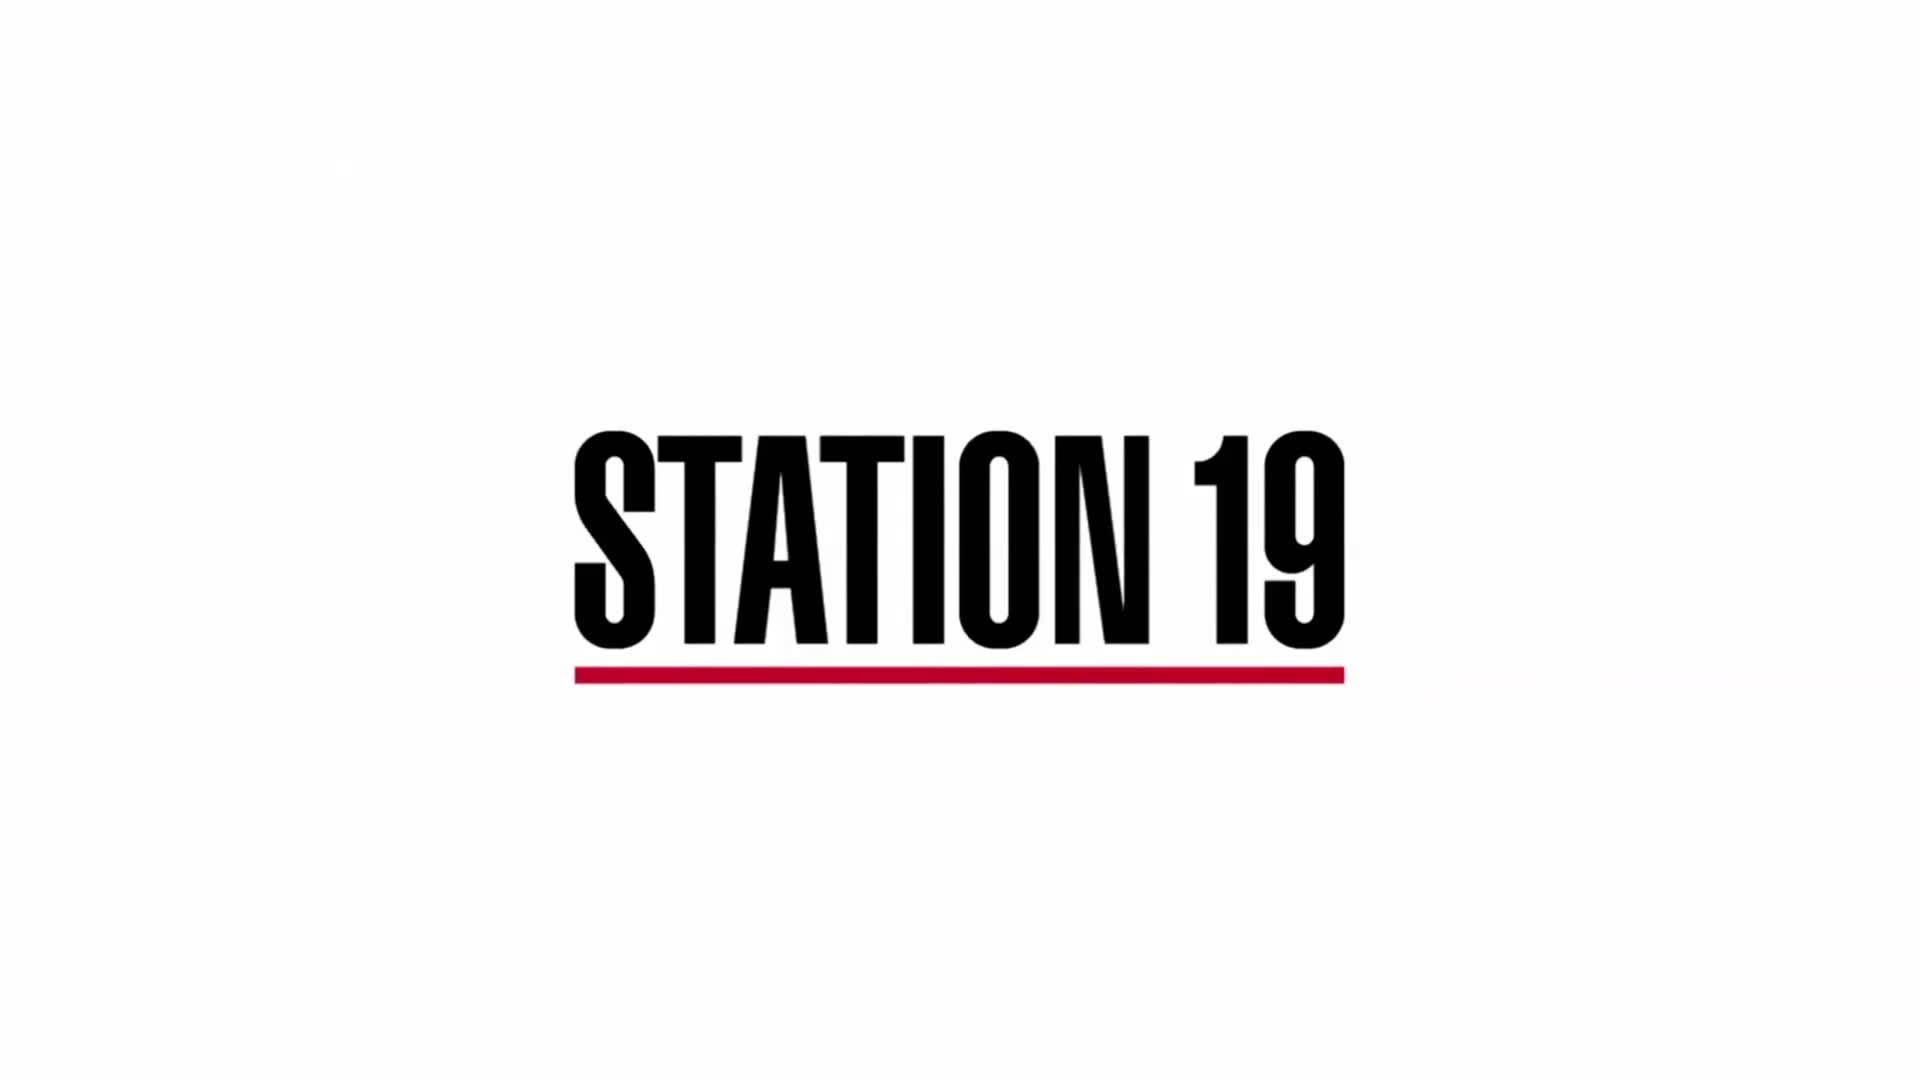 A fiery depiction of the Station 19 TV show logo Wallpaper